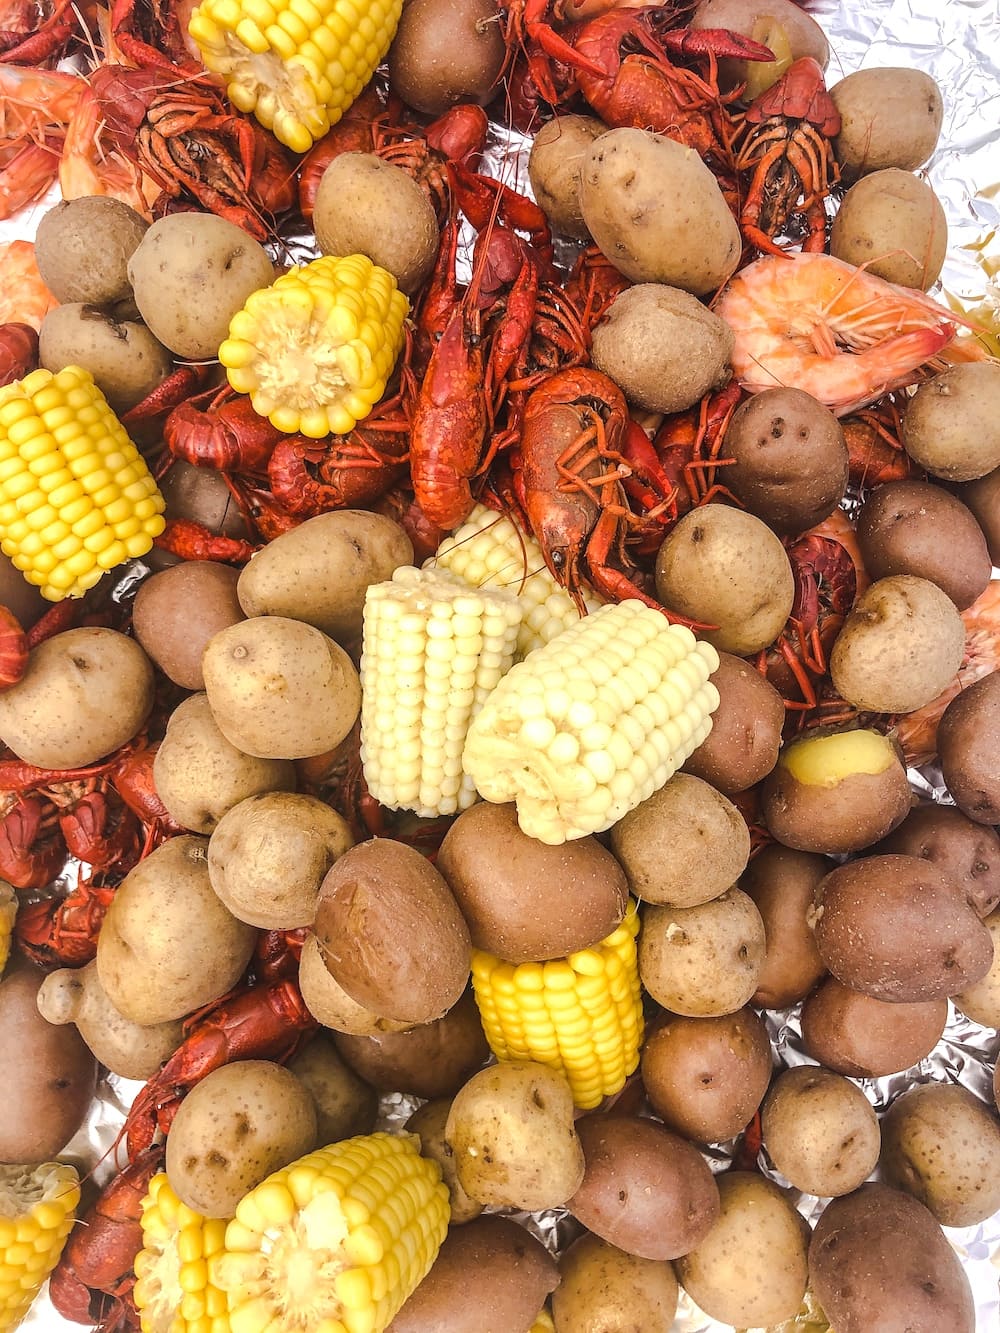 Mostly potatoes and corn with a few crawfish